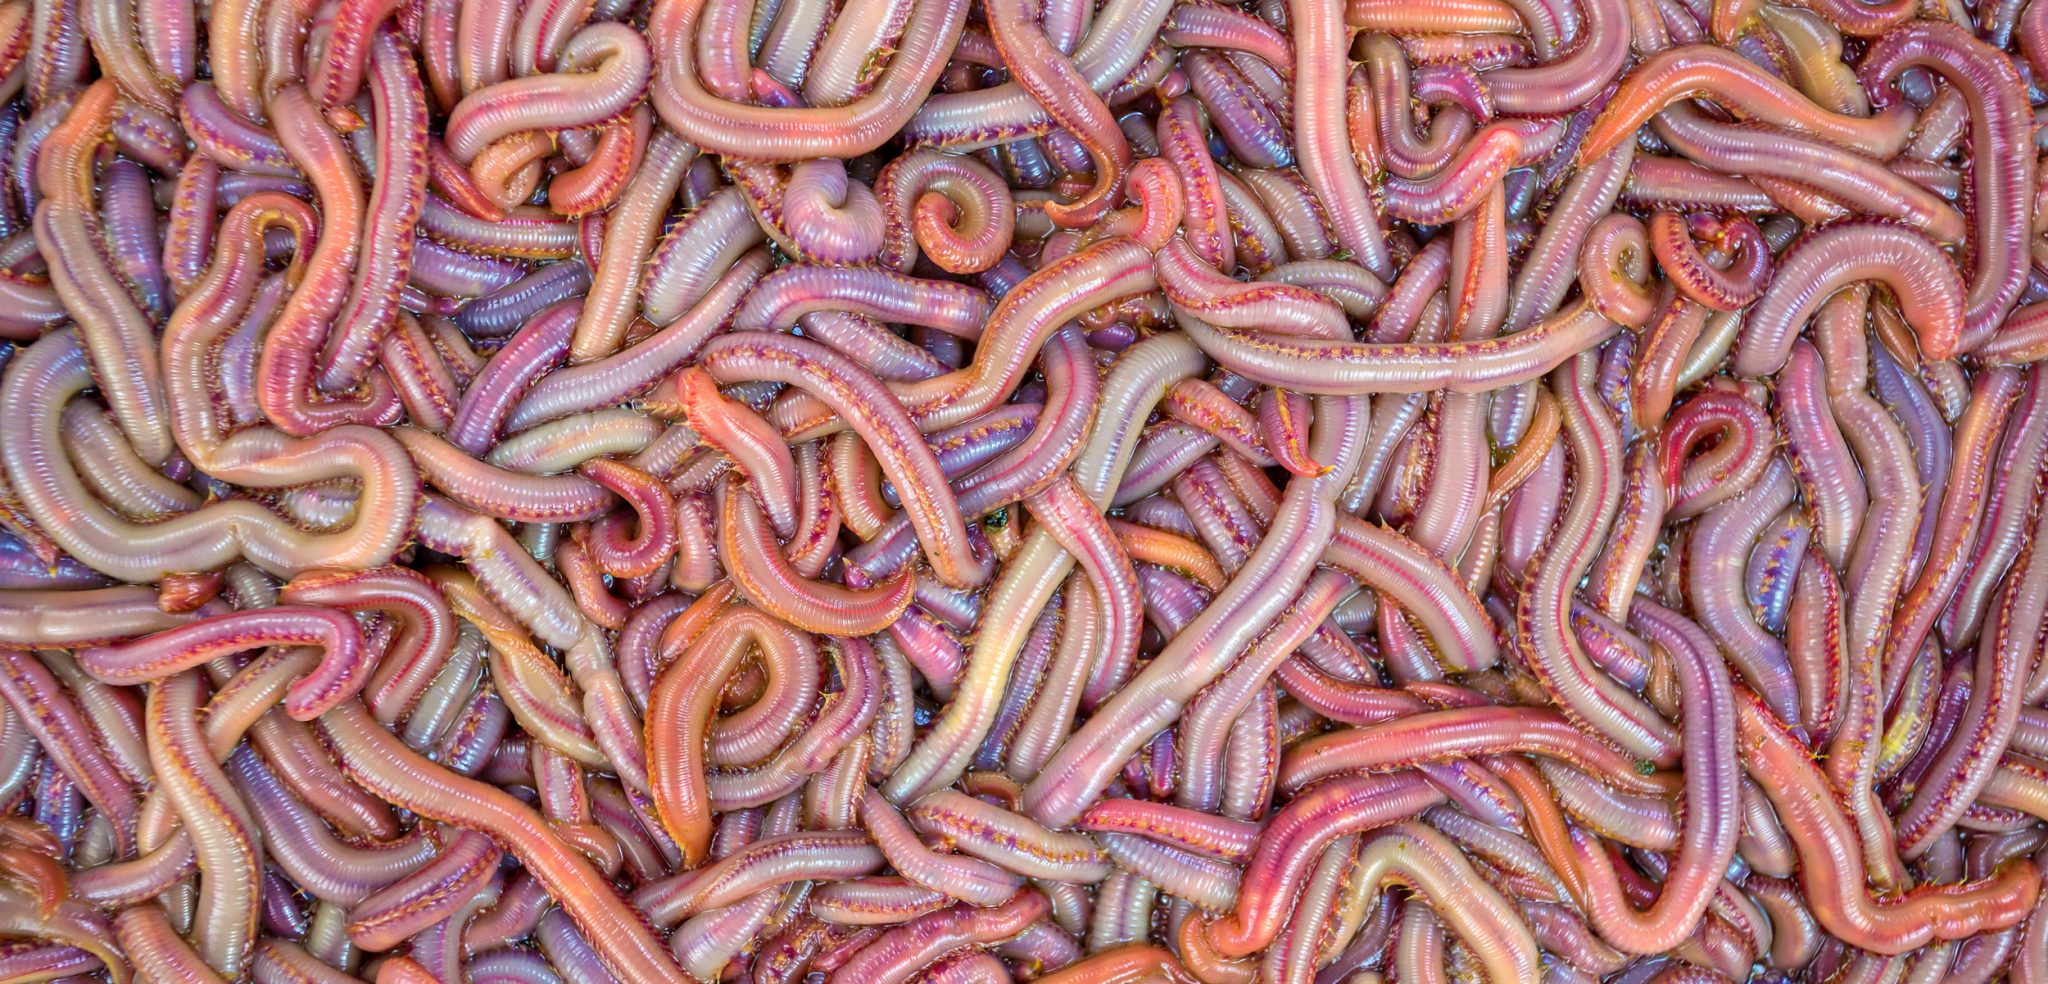 download bloodworms for betta